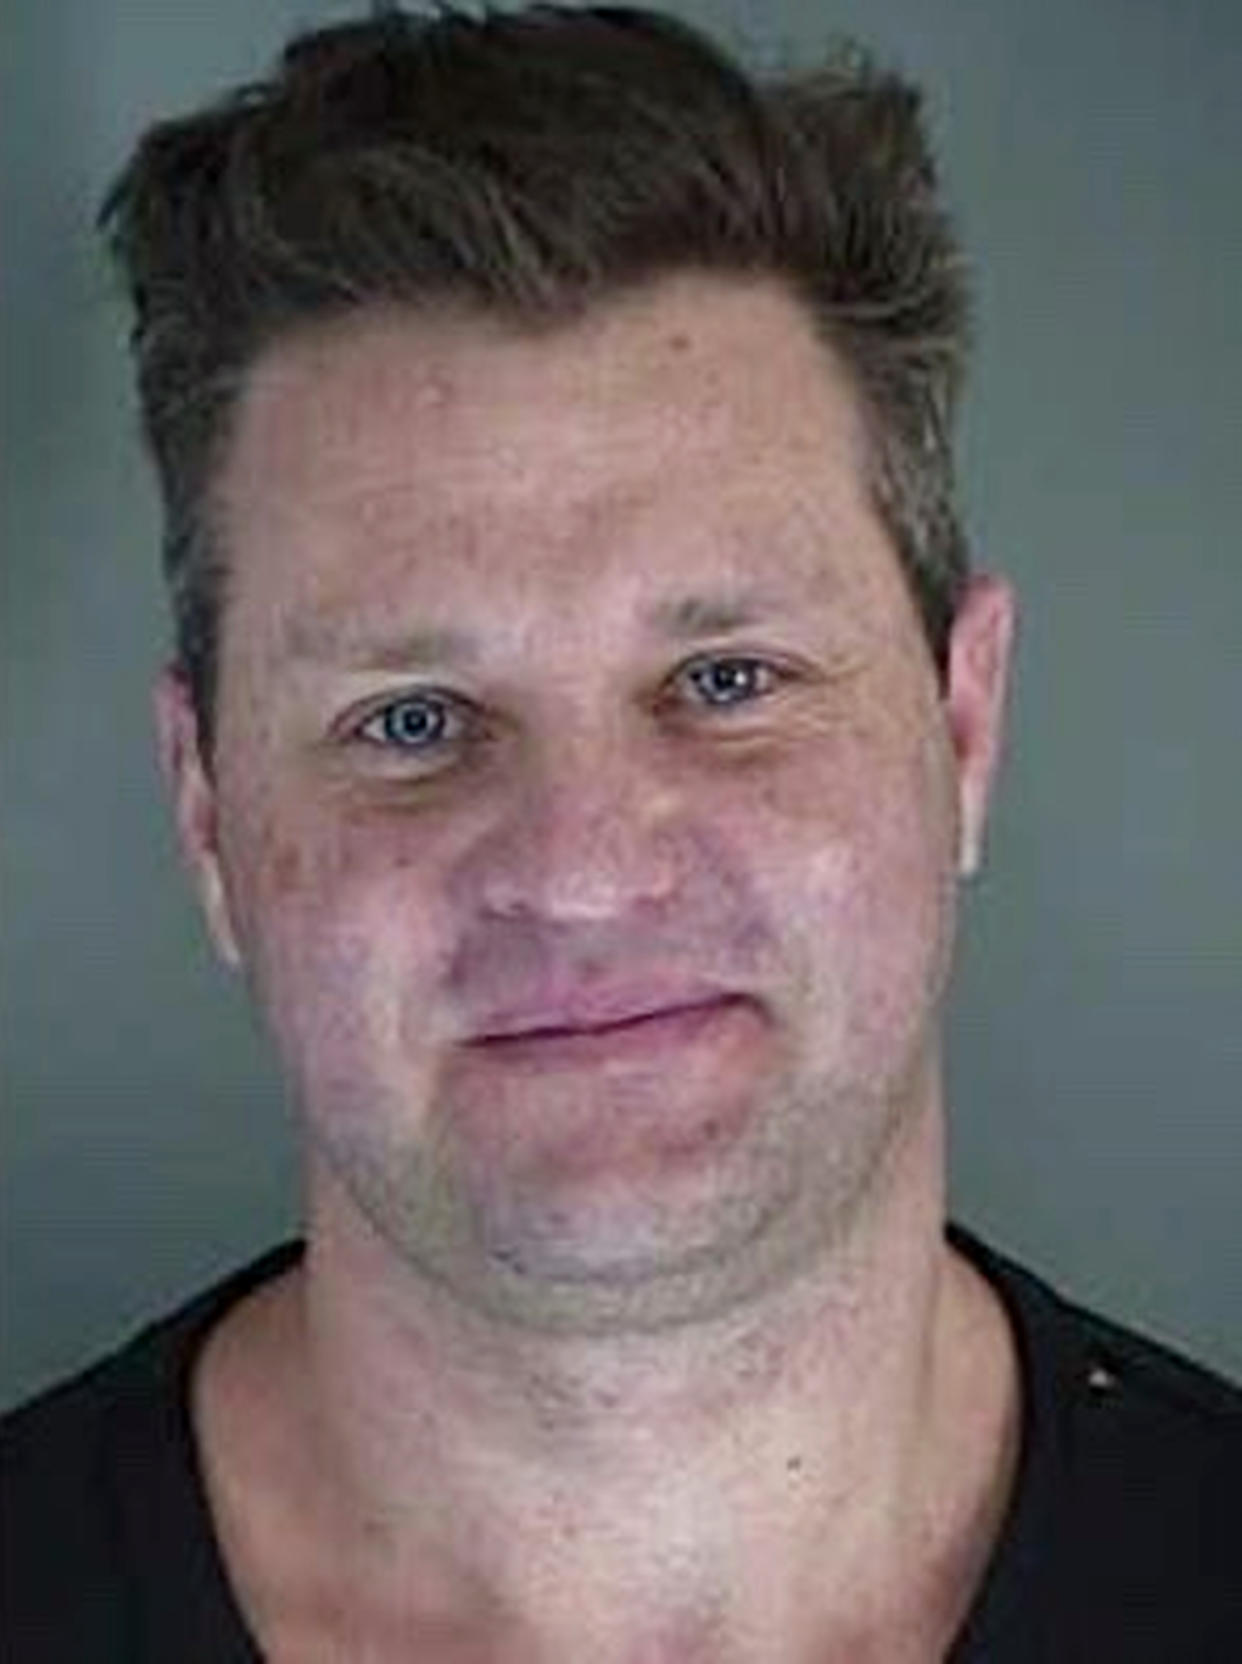 This booking photo released Saturday, Oct. 17, 2020, by the Eugene, Ore., Police Department shows suspect Zachery Ty Bryan. Bryan, the actor who played the oldest son on the long-running 1990s sit-com “Home Improvement” was arrested Friday, OCt. 16, 2020, in Oregon and faces charges of strangulation and assault. (Eugene Police Department via AP)